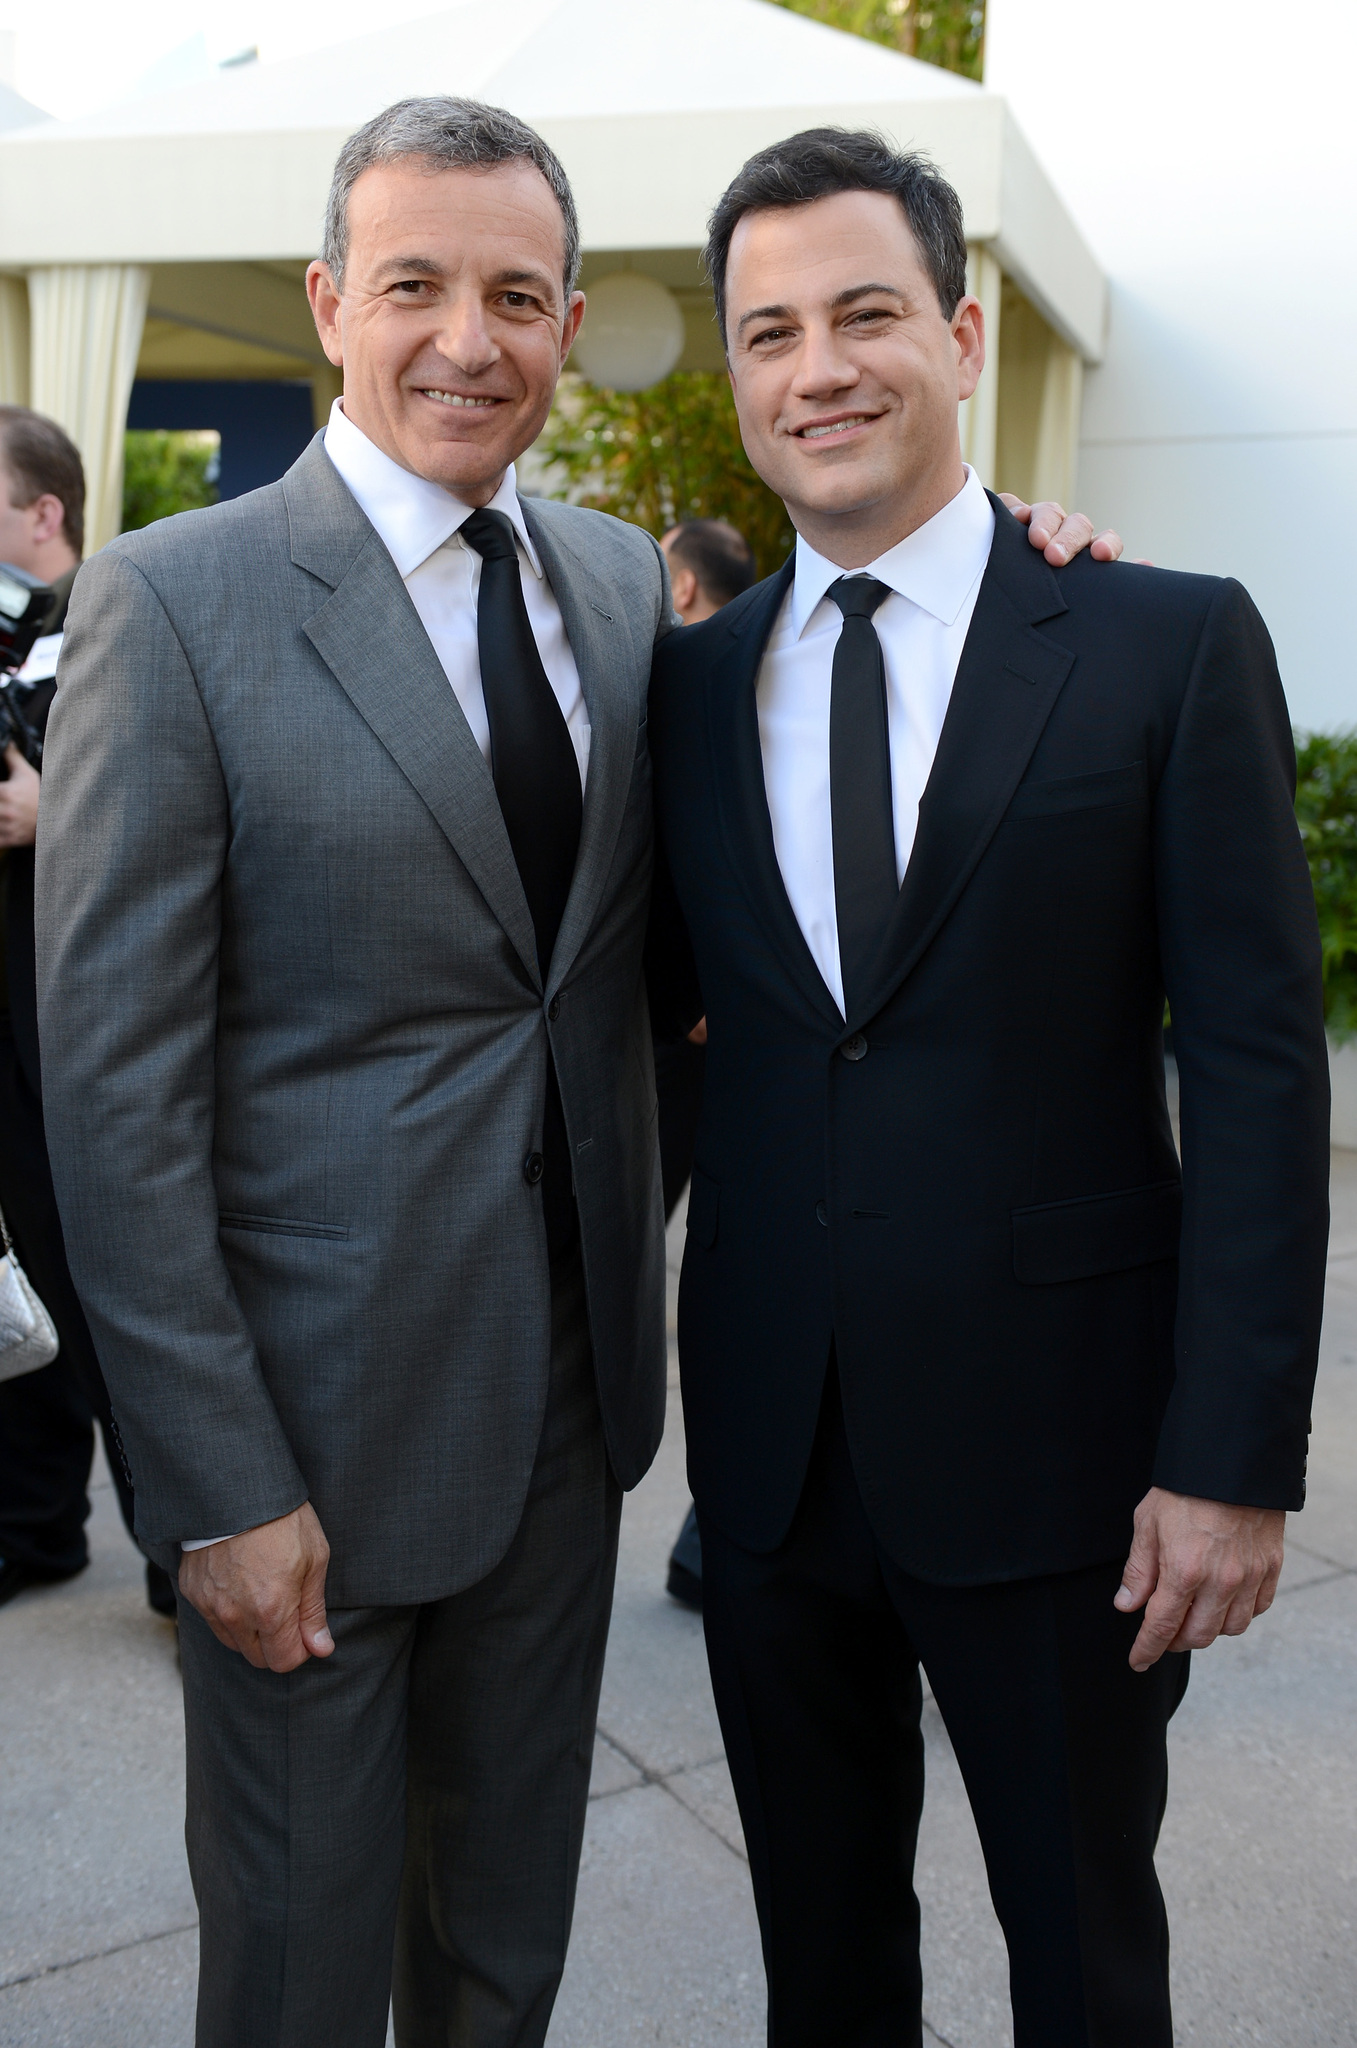 Jimmy Kimmel and Robert A. Iger